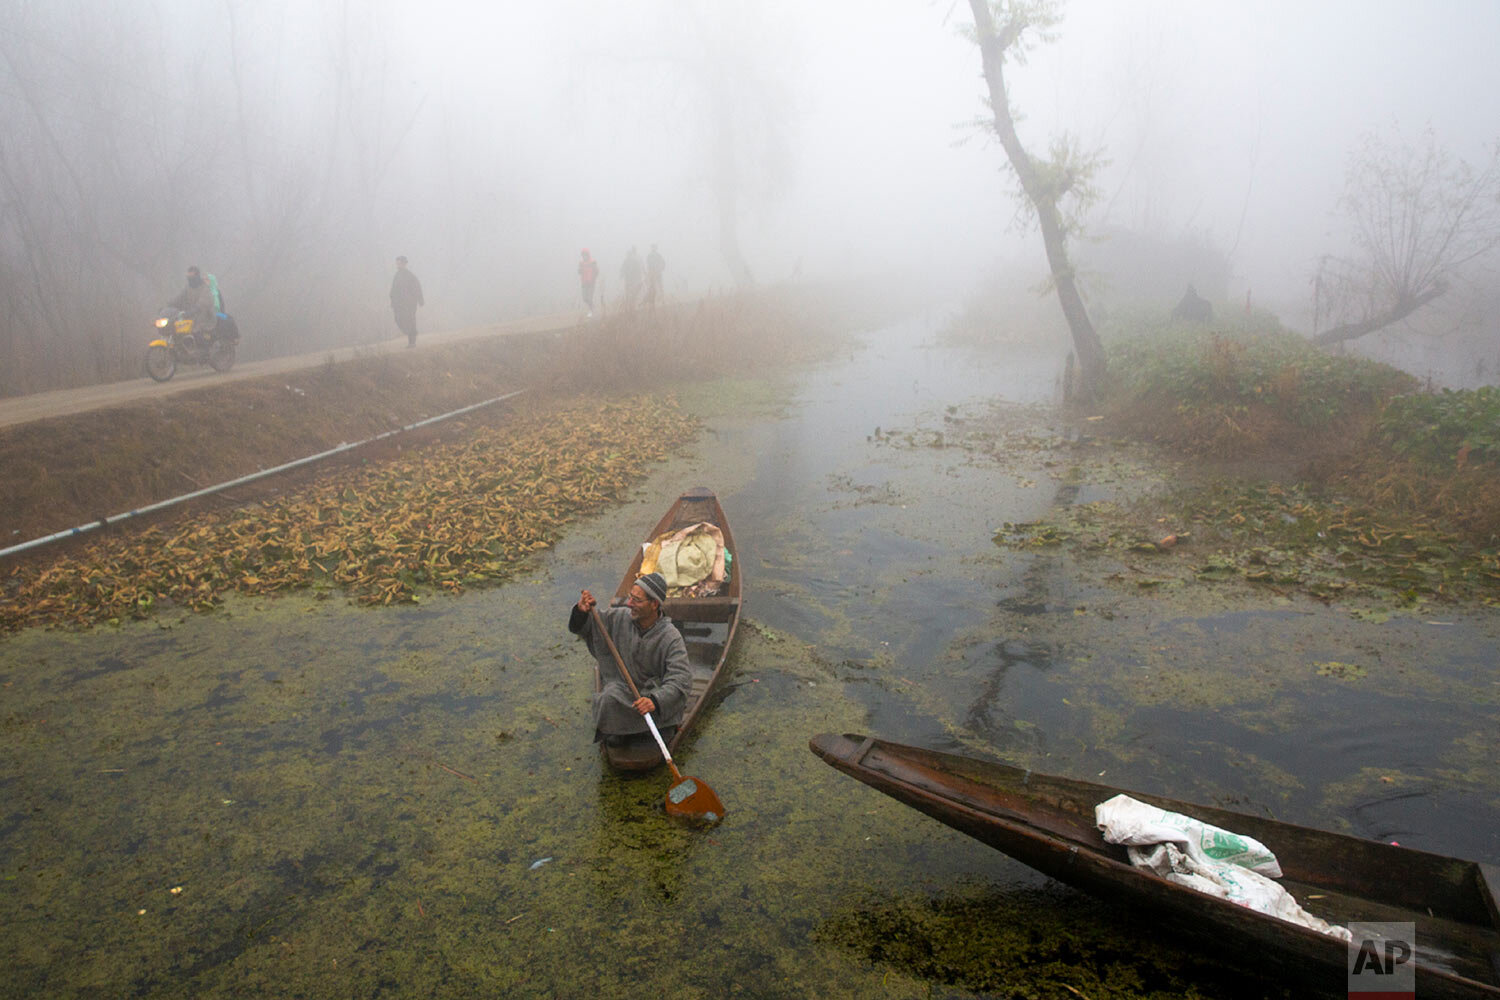  A Kashmiri boatman rows his boat in the interiors of the Dal Lake surrounded by dense fog on a cold morning in Srinagar, Indian controlled Kashmir, Indian controlled Kashmir, Thursday, Dec. 3, 2020. (AP Photo/ Dar Yasin) 